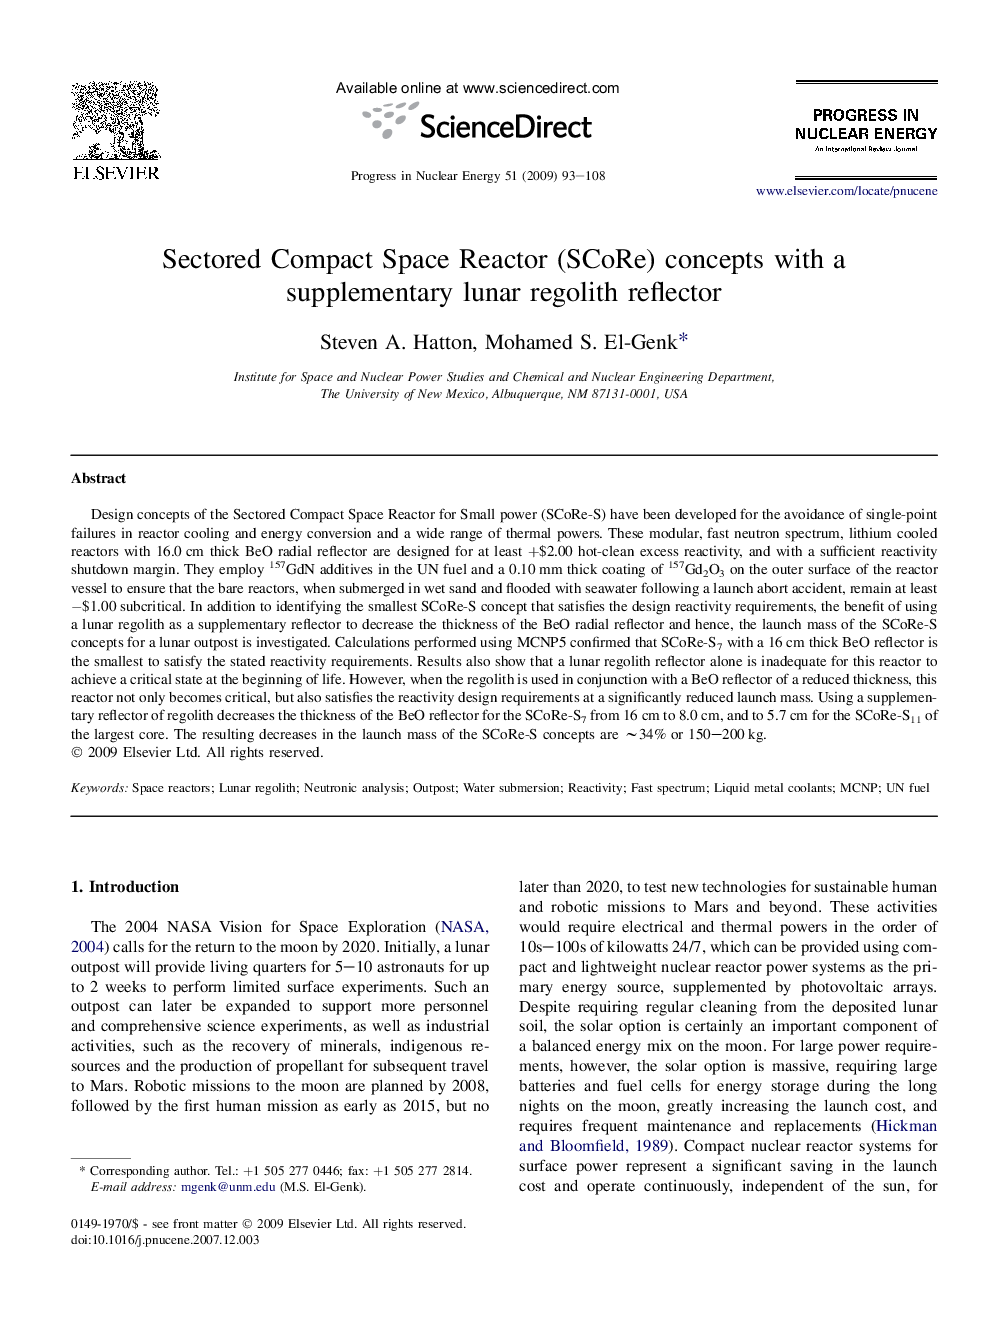 Sectored Compact Space Reactor (SCoRe) concepts with a supplementary lunar regolith reflector